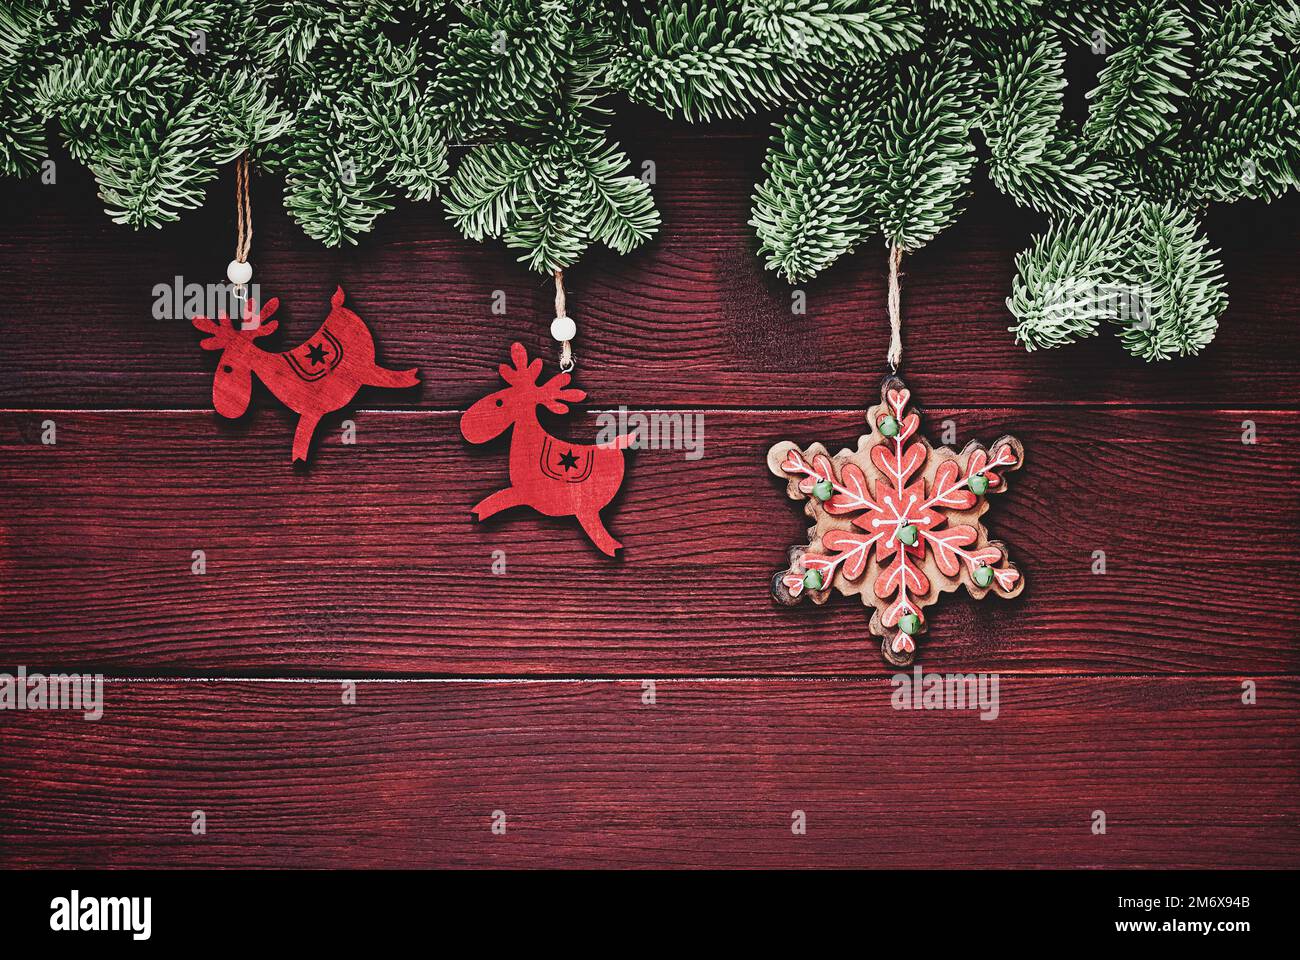 Winter holidays traditional ornaments, christmas background with spruce twigs border, deers and snowflake decorations Stock Photo